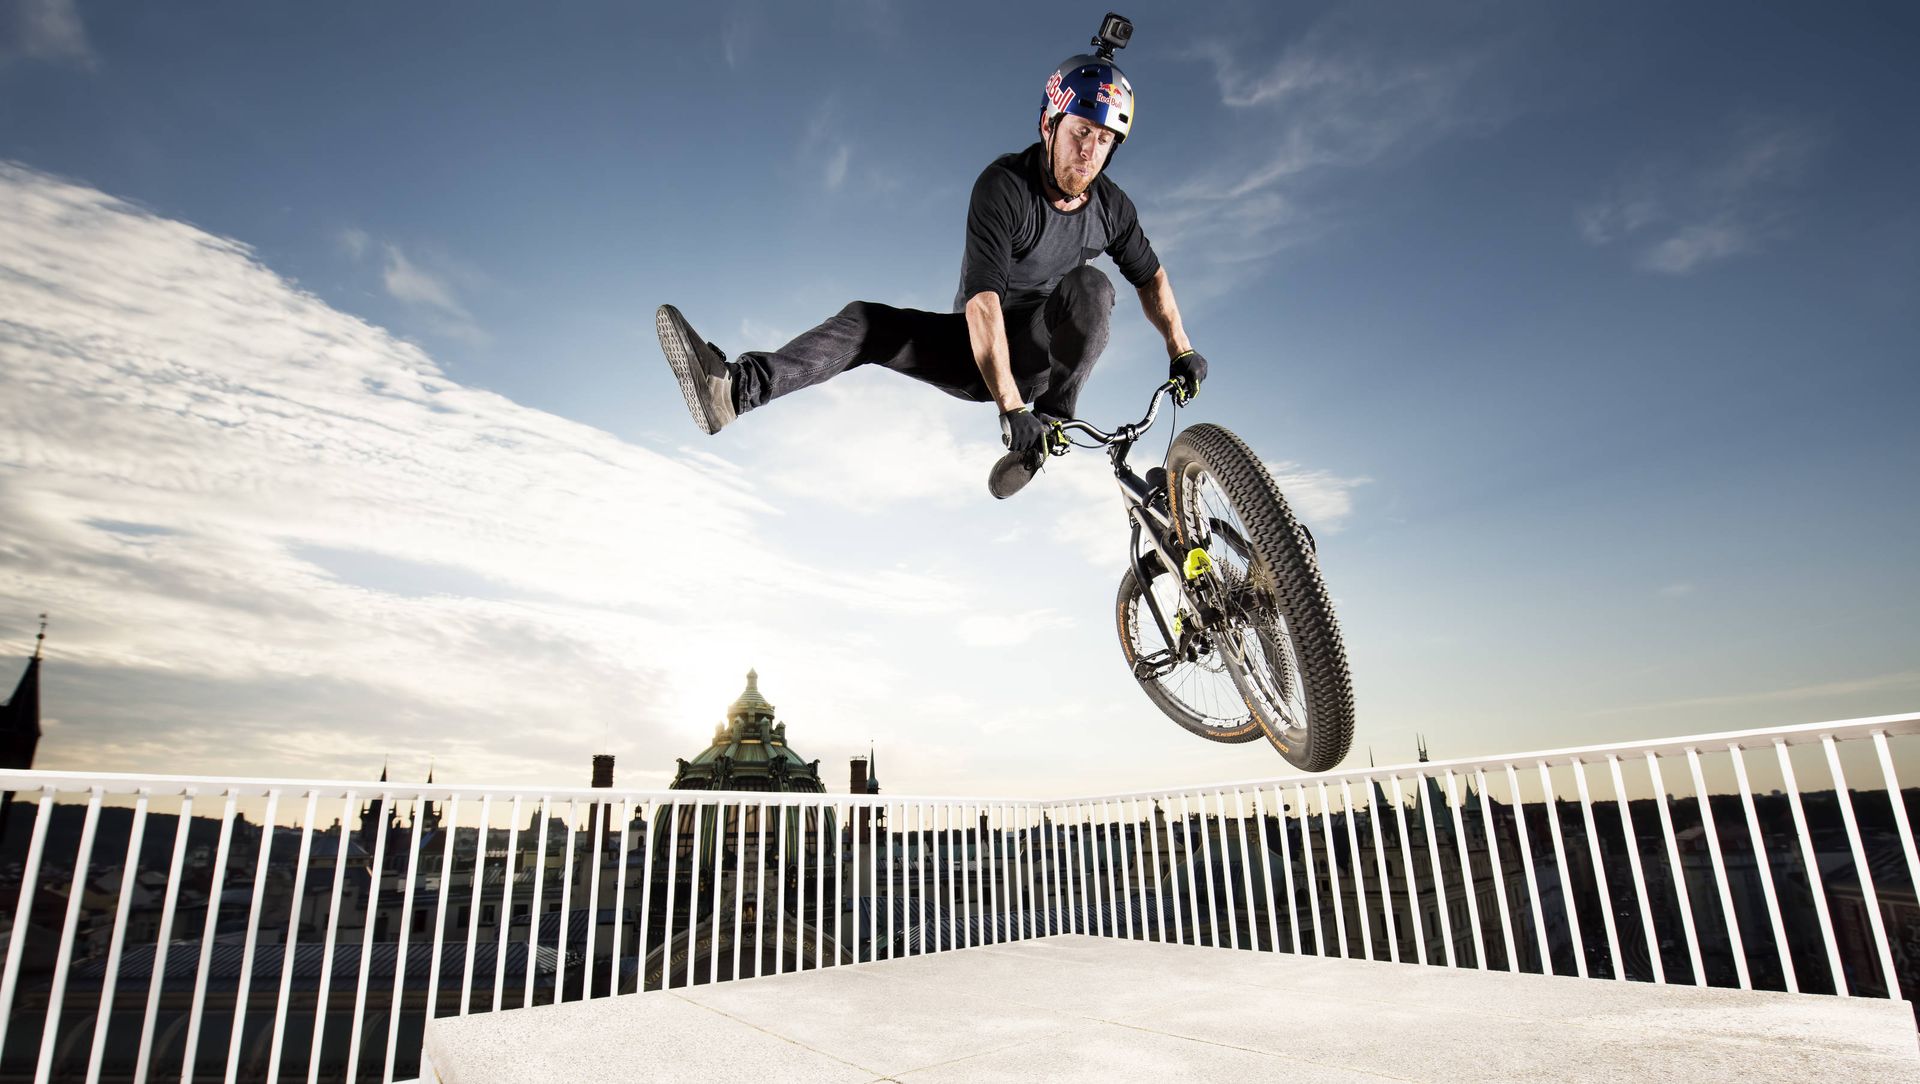 Freestyle bmx, Cycle sport, Extreme sport, Vehicle, Bmx bike, Cycling, Sky, Bicycle, Recreation, Bicycle motocross, 